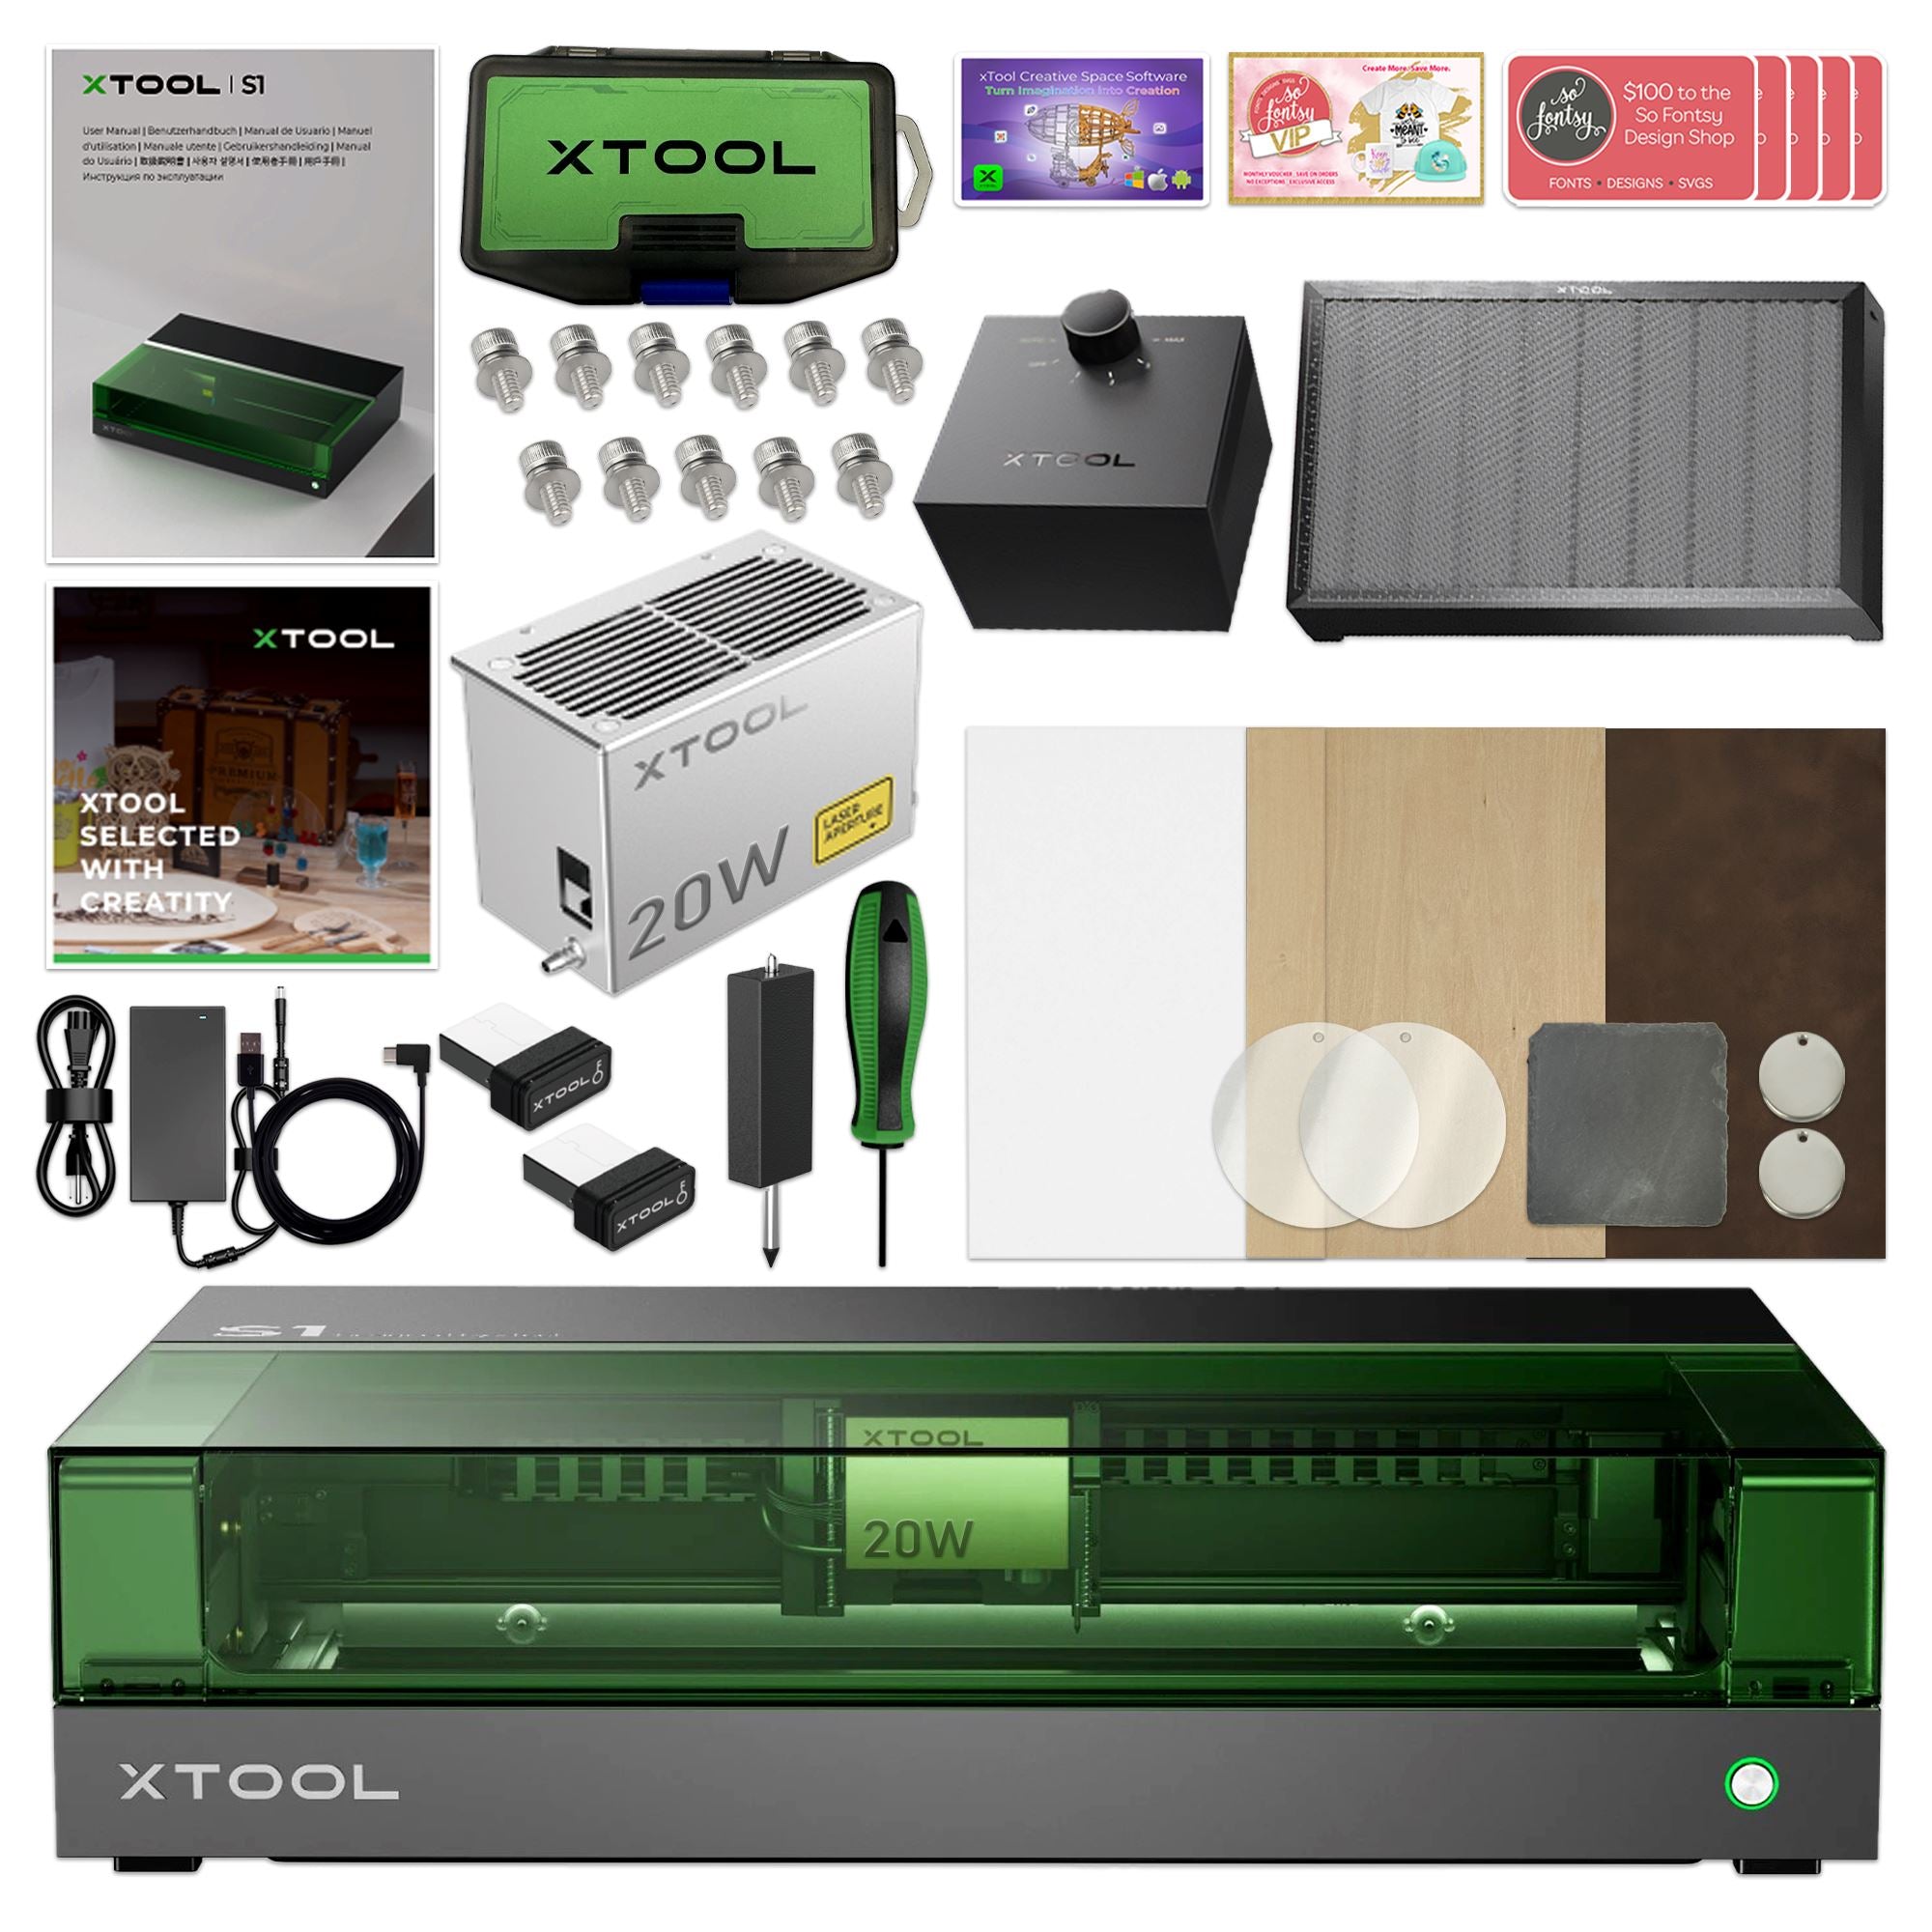 xTool S1 20W/40W Enclosed Diode Laser Cutter